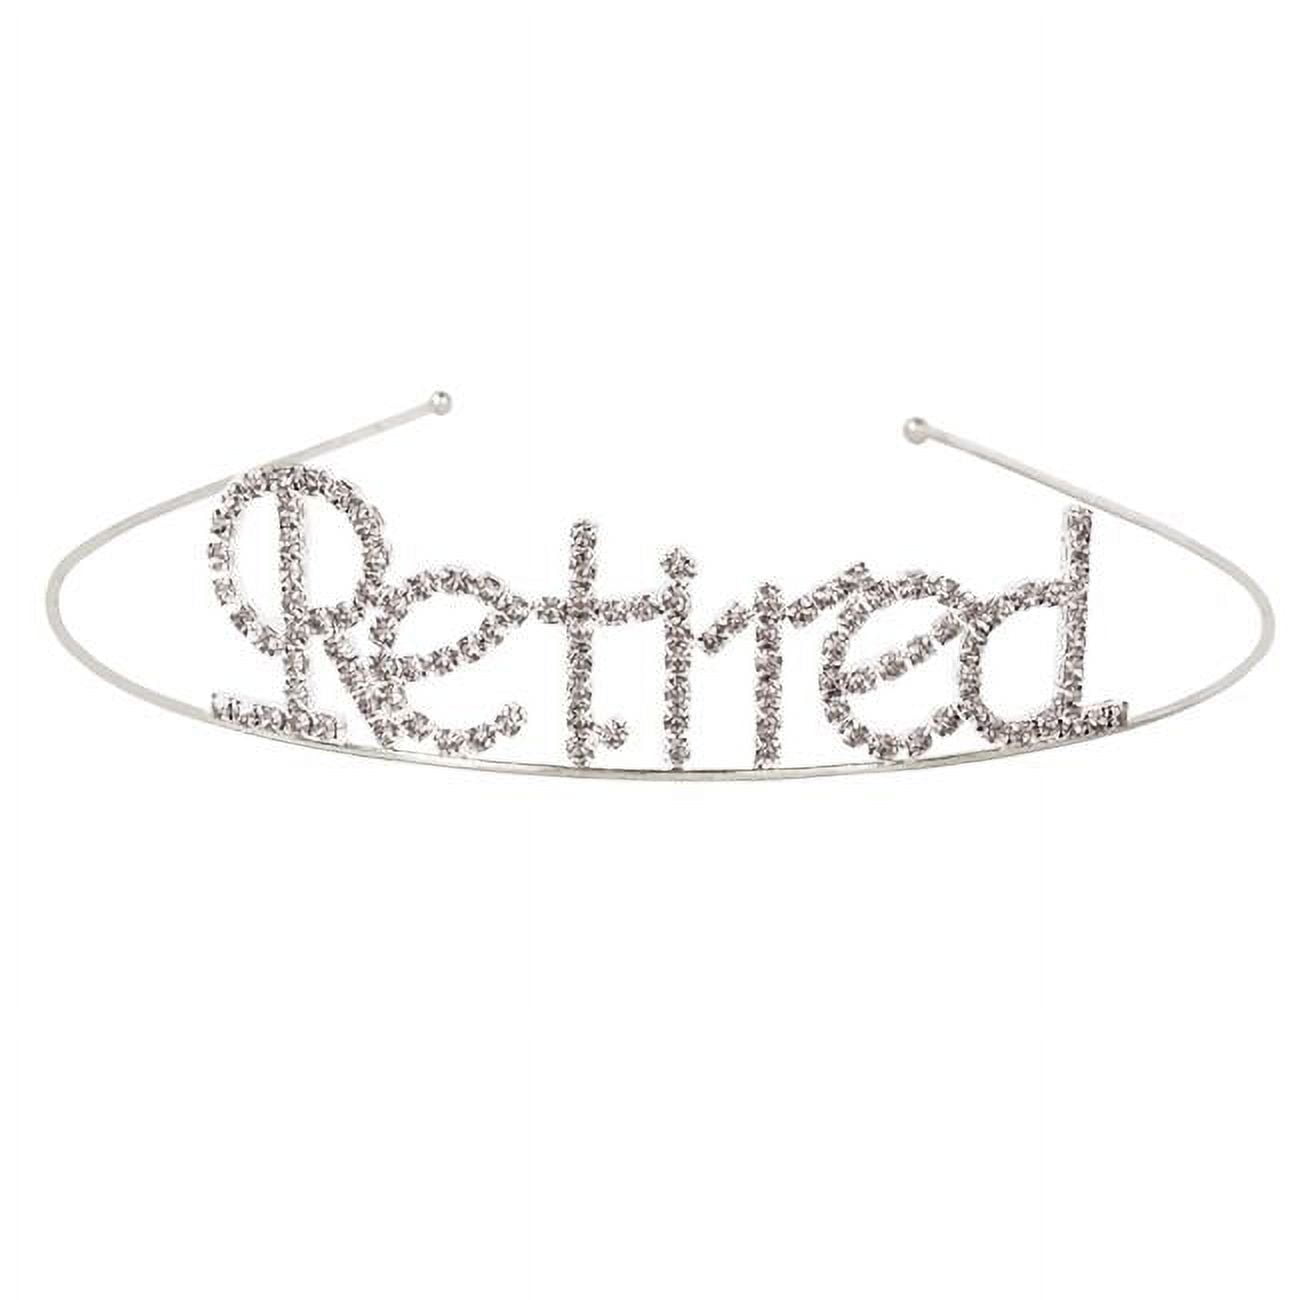 Picture of Beistle 60652 Retired Royal Rhinestone Tiara - Pack of 6